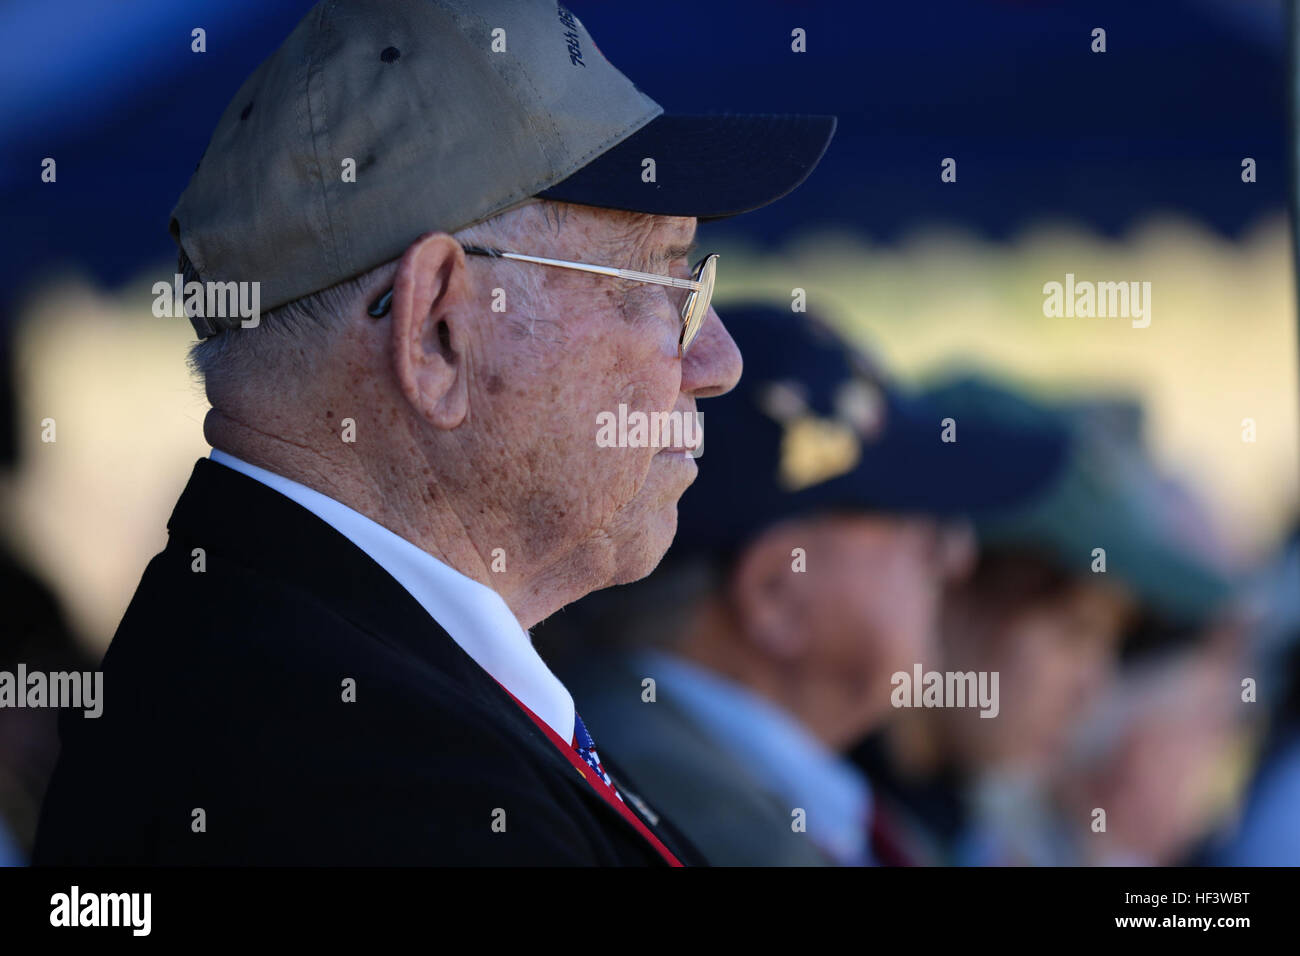 U.S. Marine Corps veteran of Iwo Jima, Gene Bell, attends the 71st Commemoration of the Battle of Iwo Jima at Iwo To, Japan, March 19, 2016. The Iwo Jima Reunion of Honor is an opportunity for Japanese and U.S. veterans and their families, dignitaries, leaders and service members from both nations to honor the battle while recognizing 71 years of peace and prosperity in the U.S. – Japanese alliance. (U.S. Marine Corps photo by MCIPAC Combat Camera Lance Cpl. Juan Esqueda / Released) Iwo Jima 71st Reunion of Honor 160319-M-JD520-159 Stock Photo